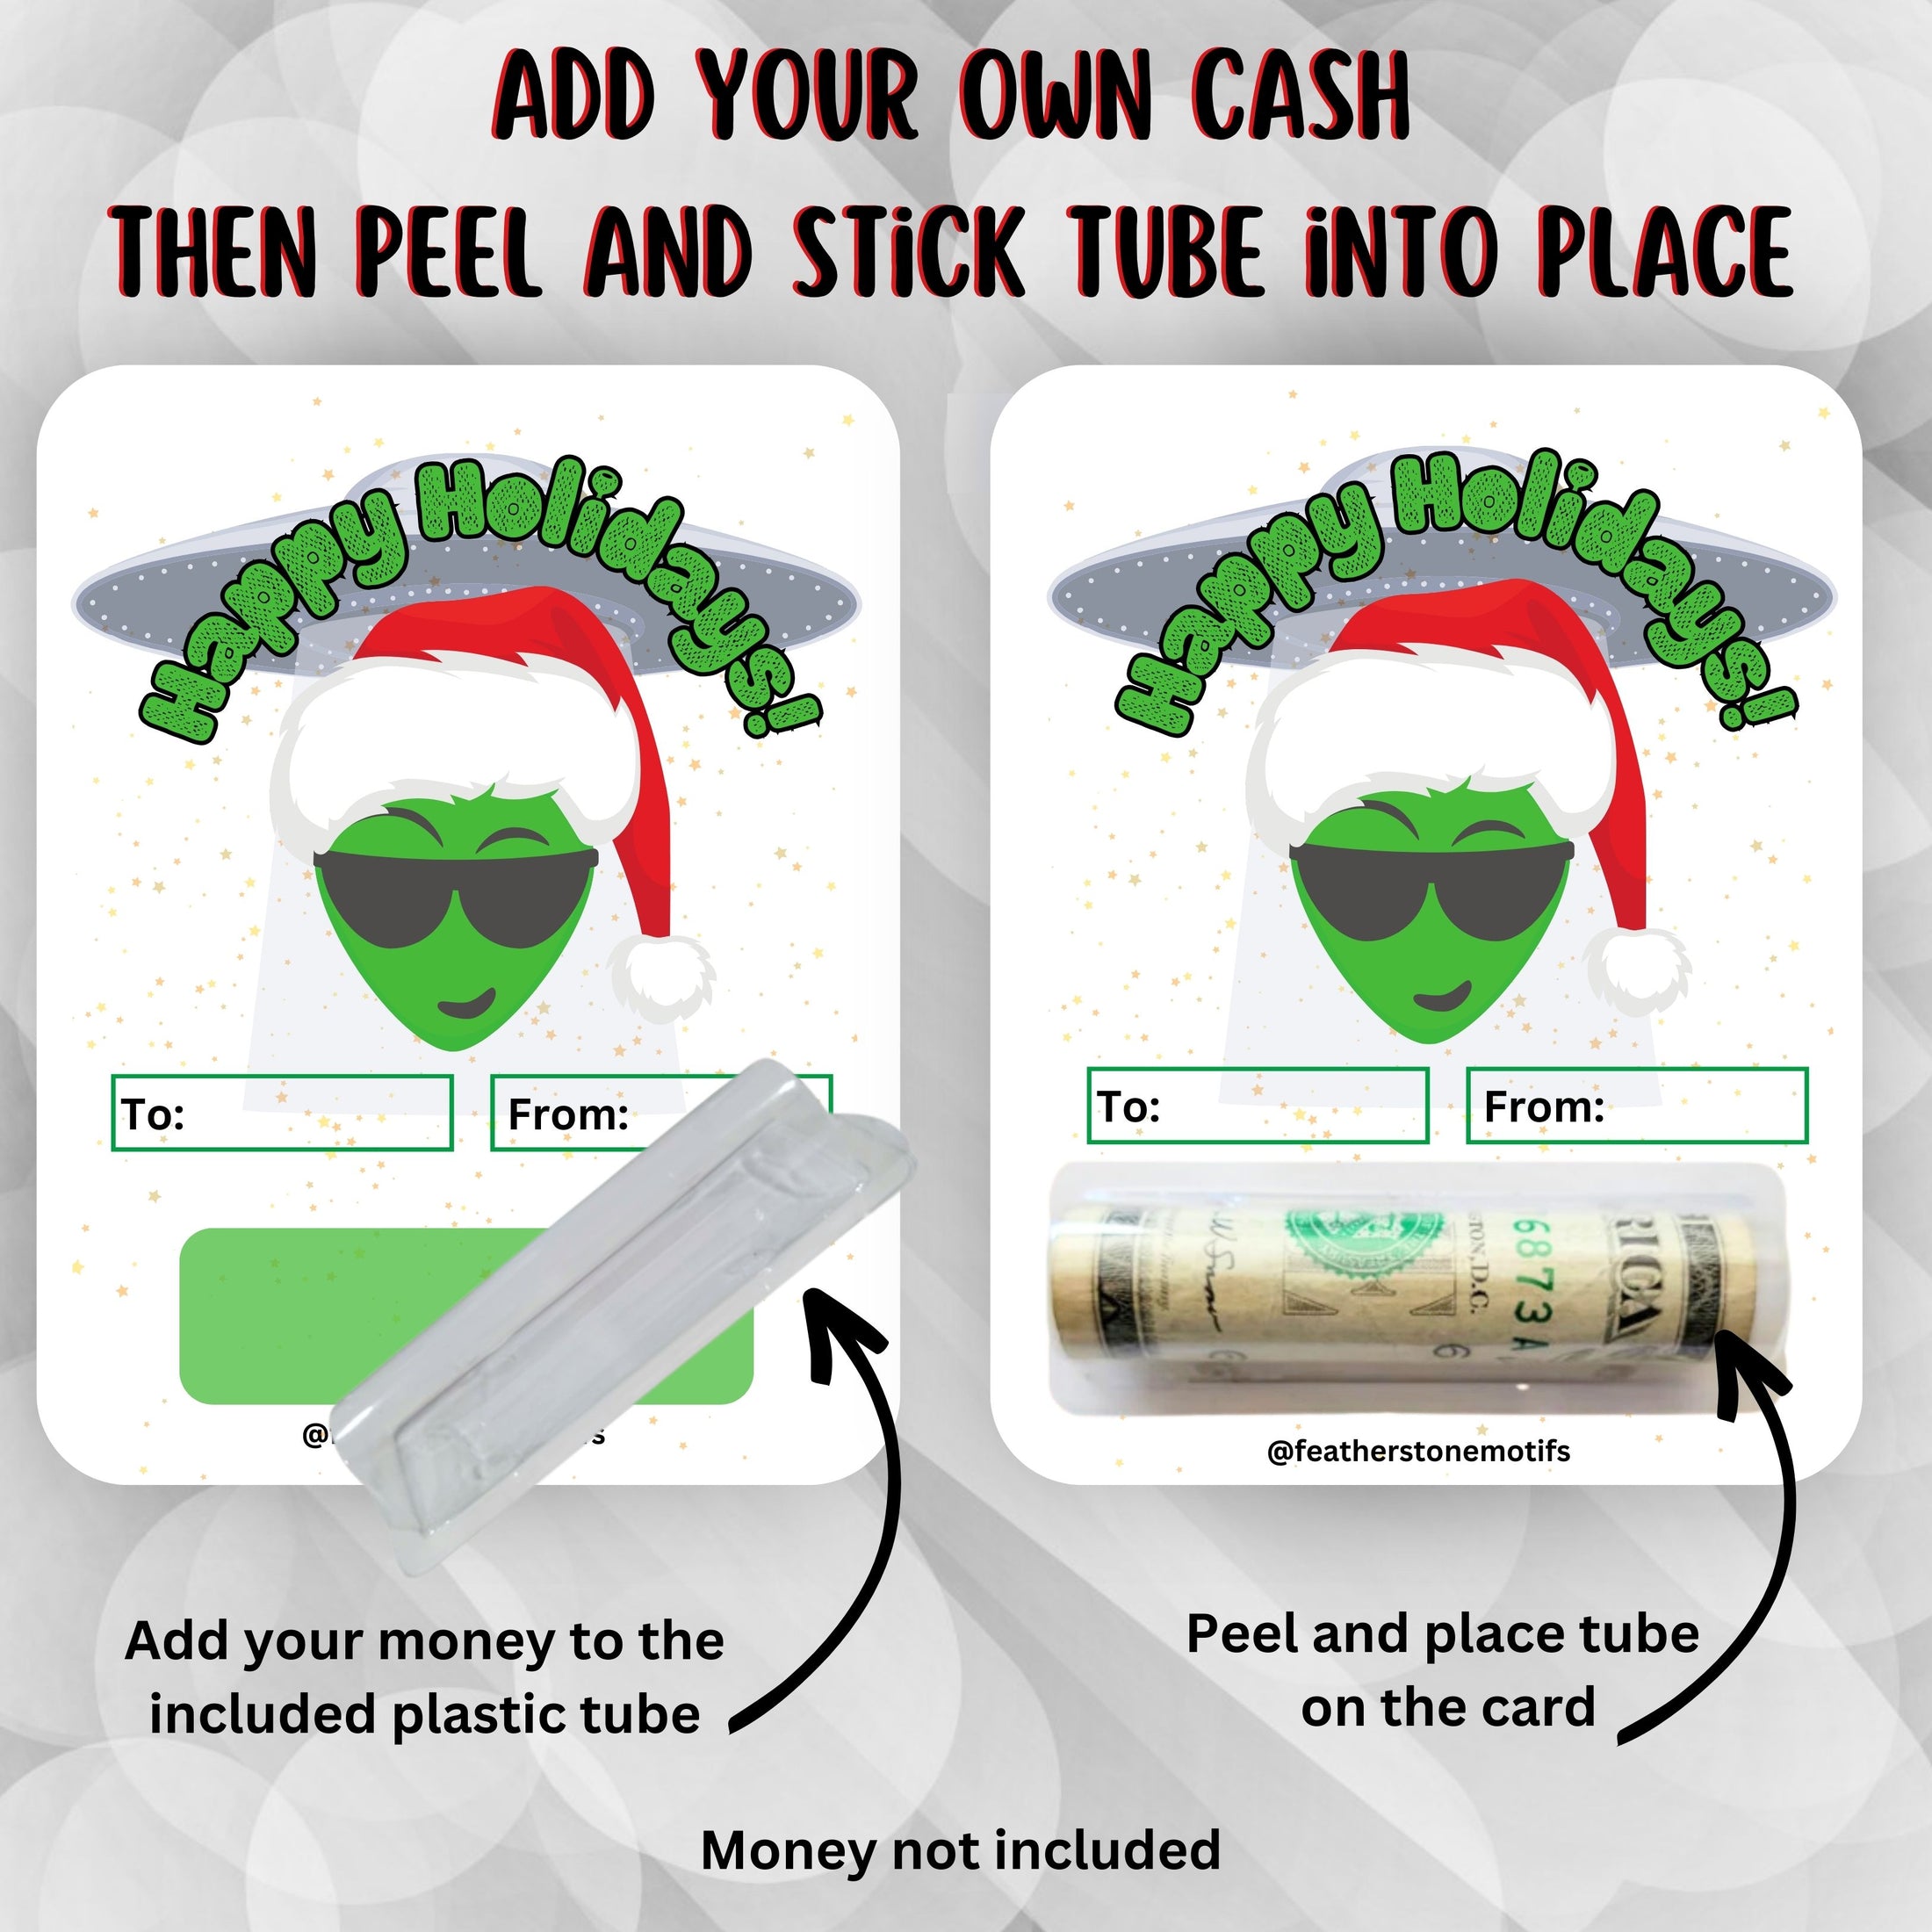 This image show how to attach the money tube to the Alien Holidays money card.